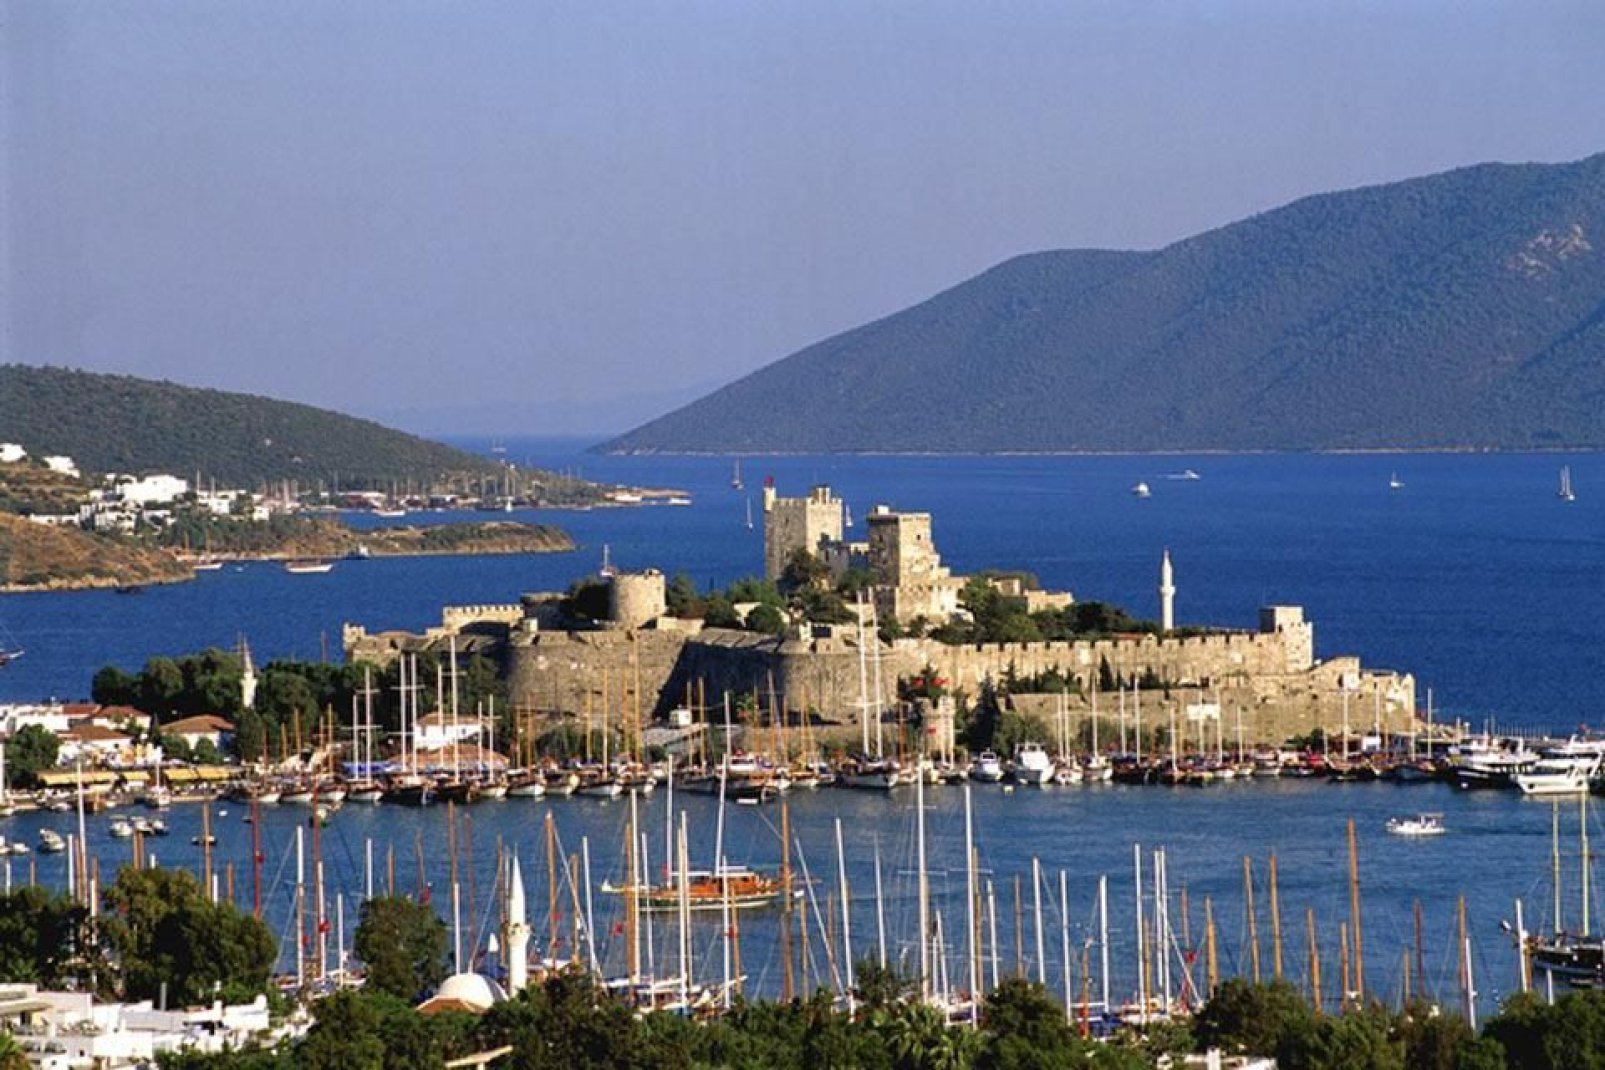 Bodrum is home to many important archaelogical sites but its most famous is undoubtedly St Peter's Castle, built by the Knights Hospitaller in the 15th century